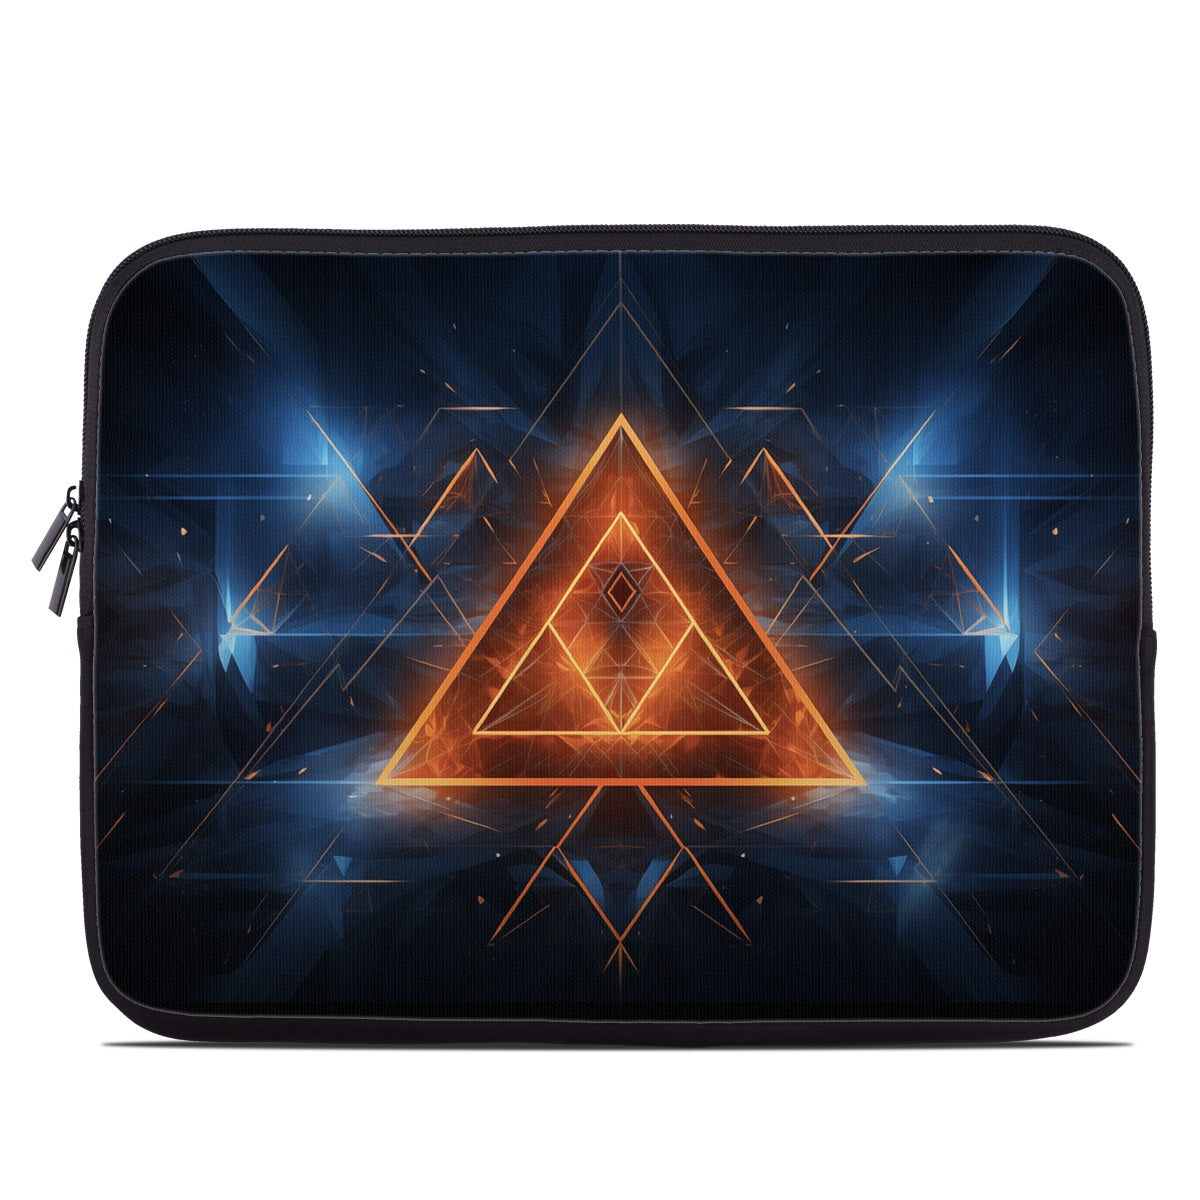 Conjecture - Laptop Sleeve